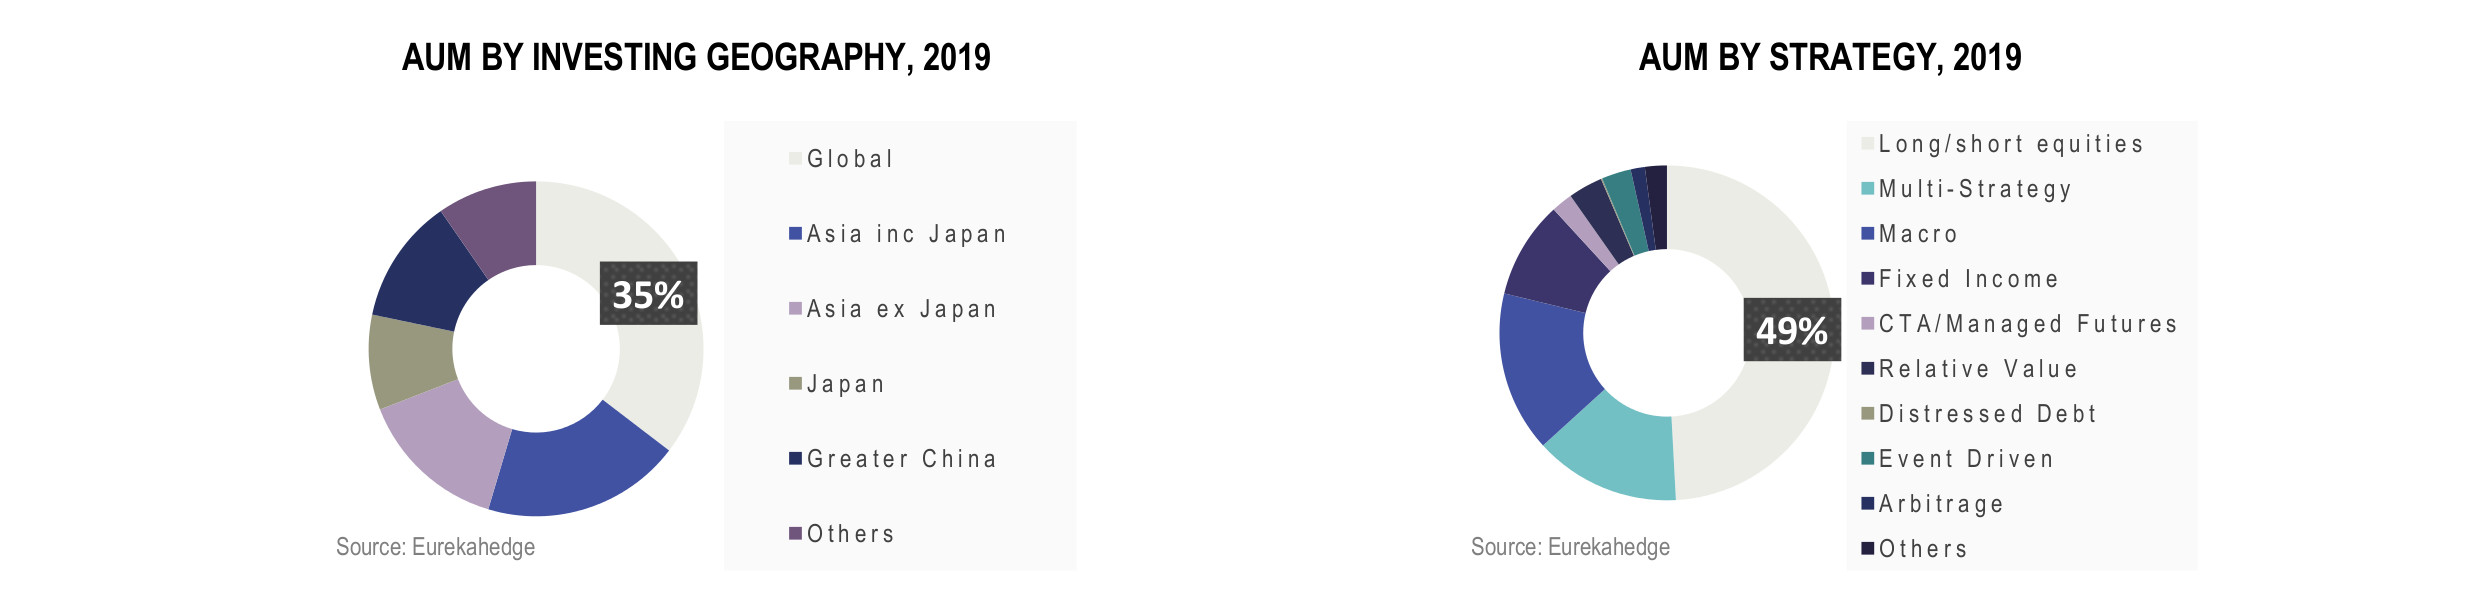 Asian Hedge Funds Infographic January 2020 - AUM by investing geography and number of funds by domicile